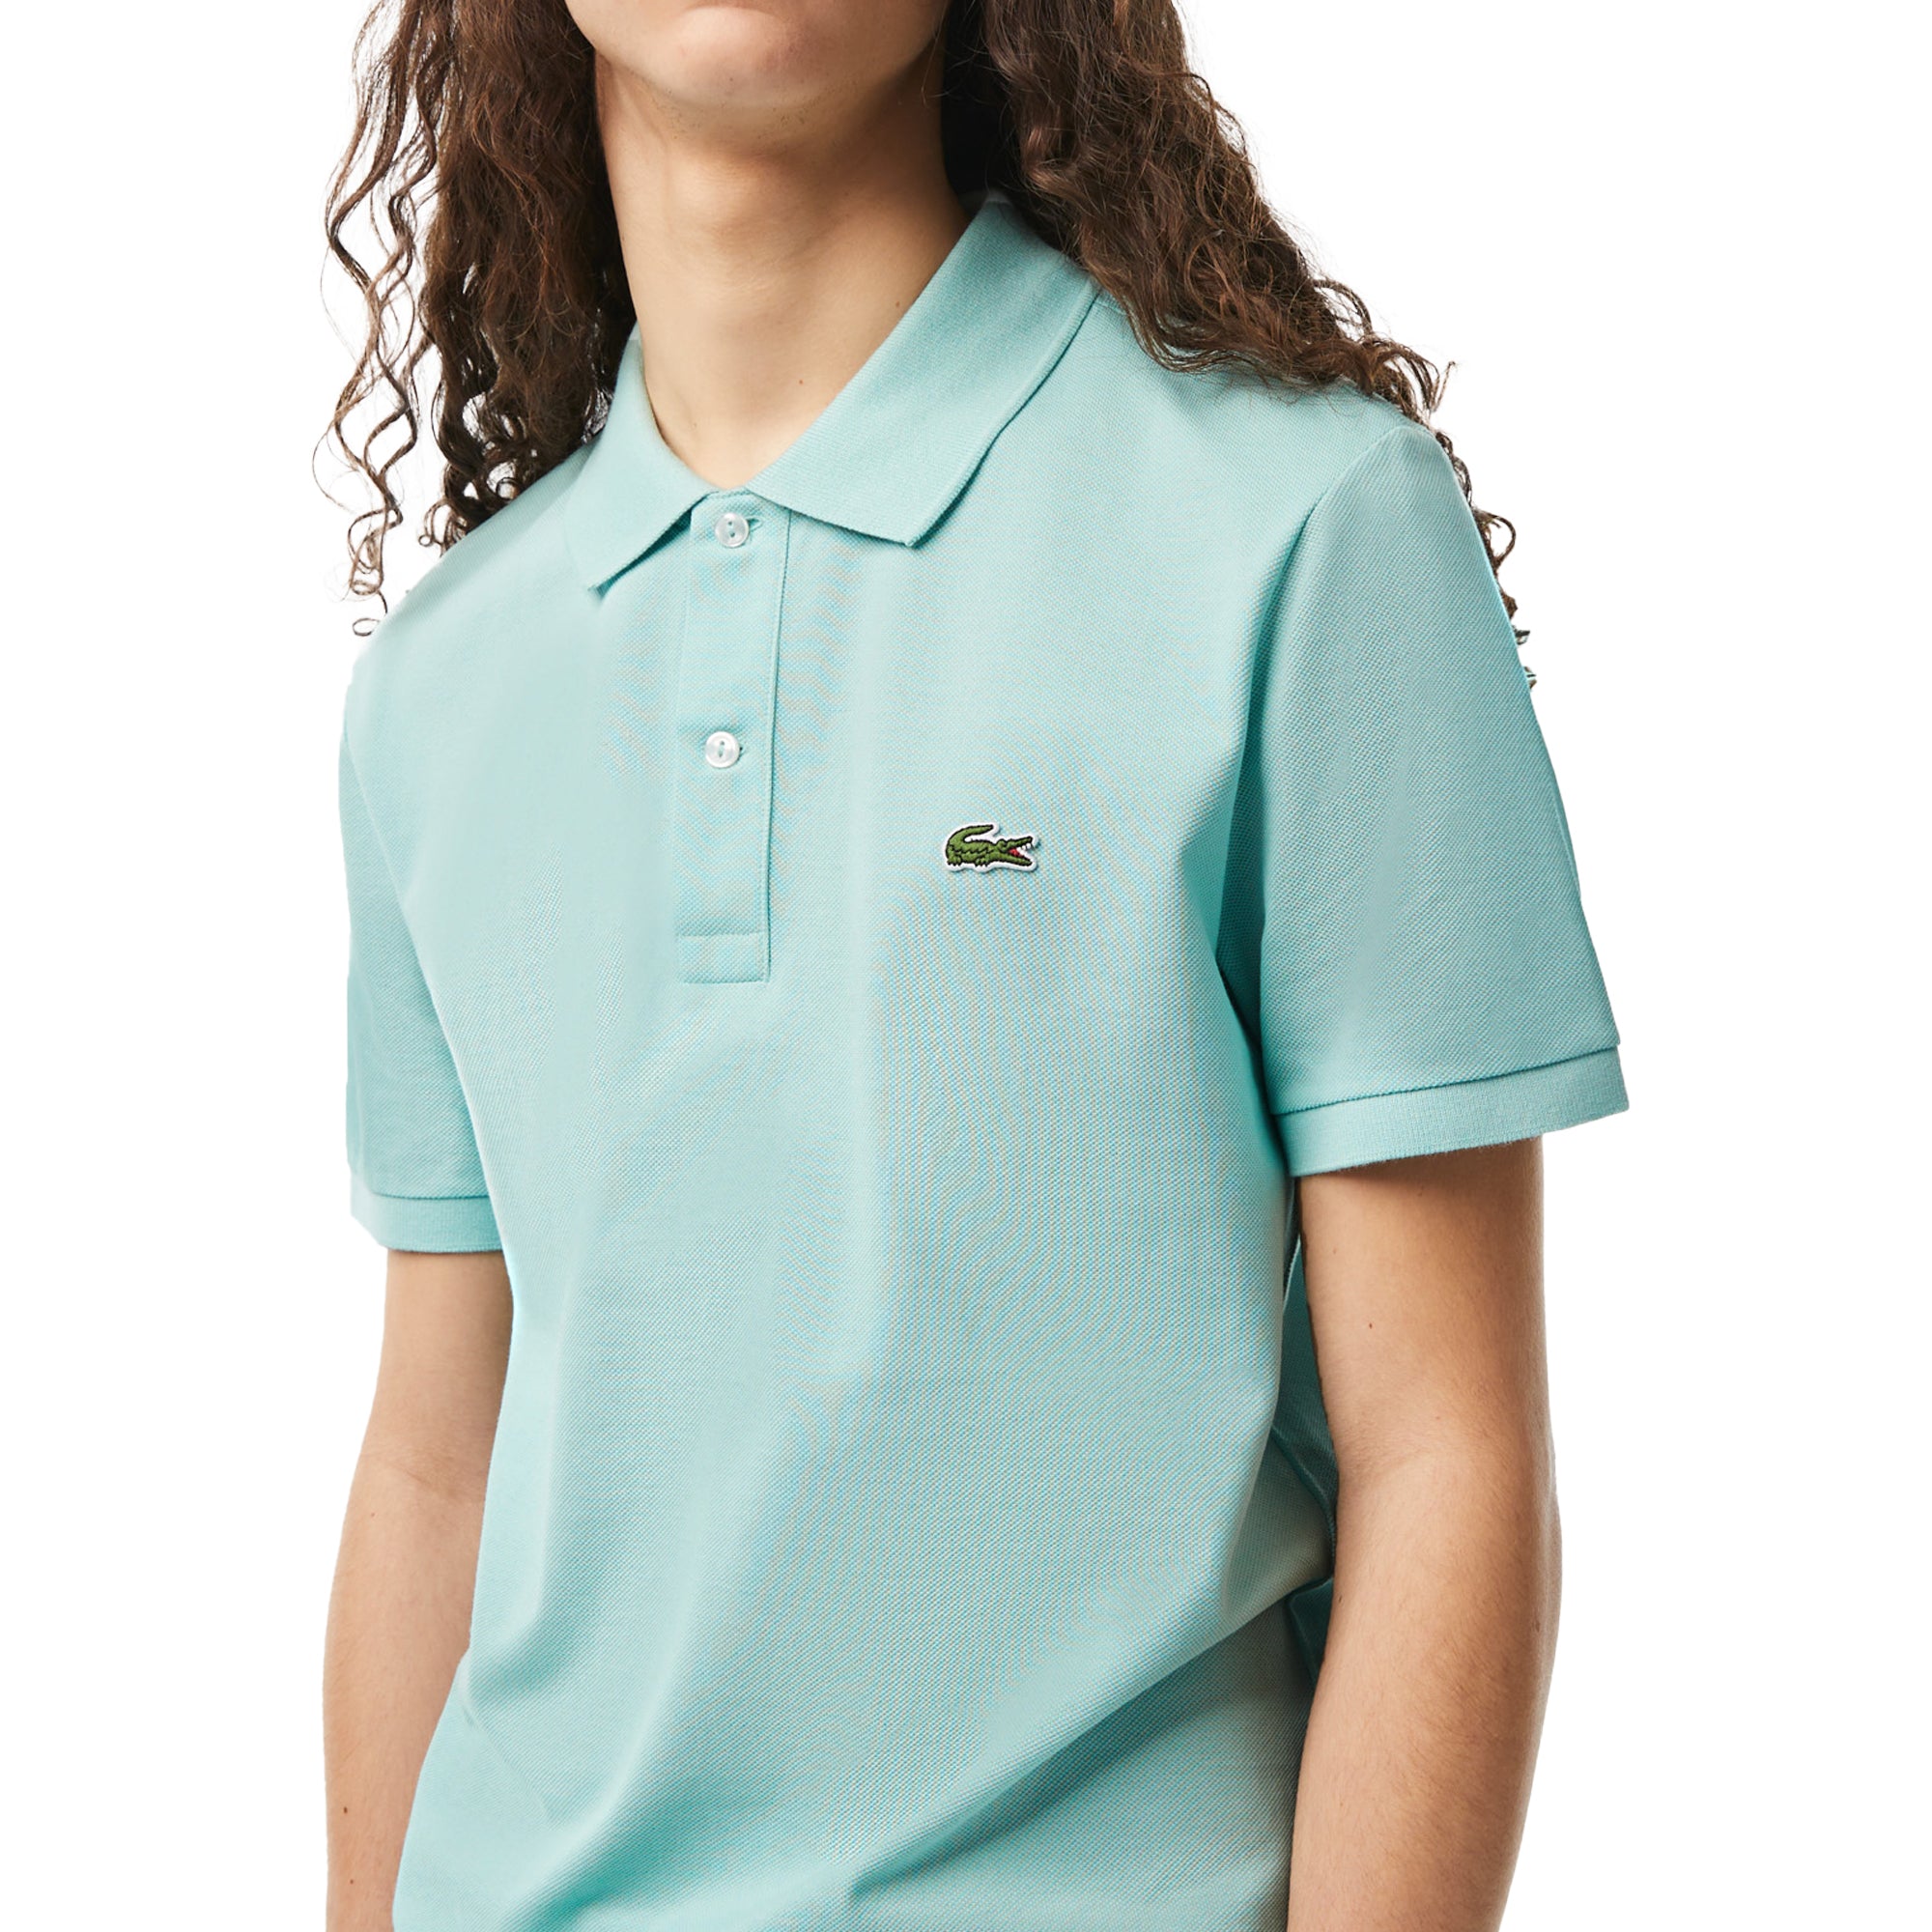 Lacoste Short Sleeved Slim Fit Polo PH4012 - Pastille Mint